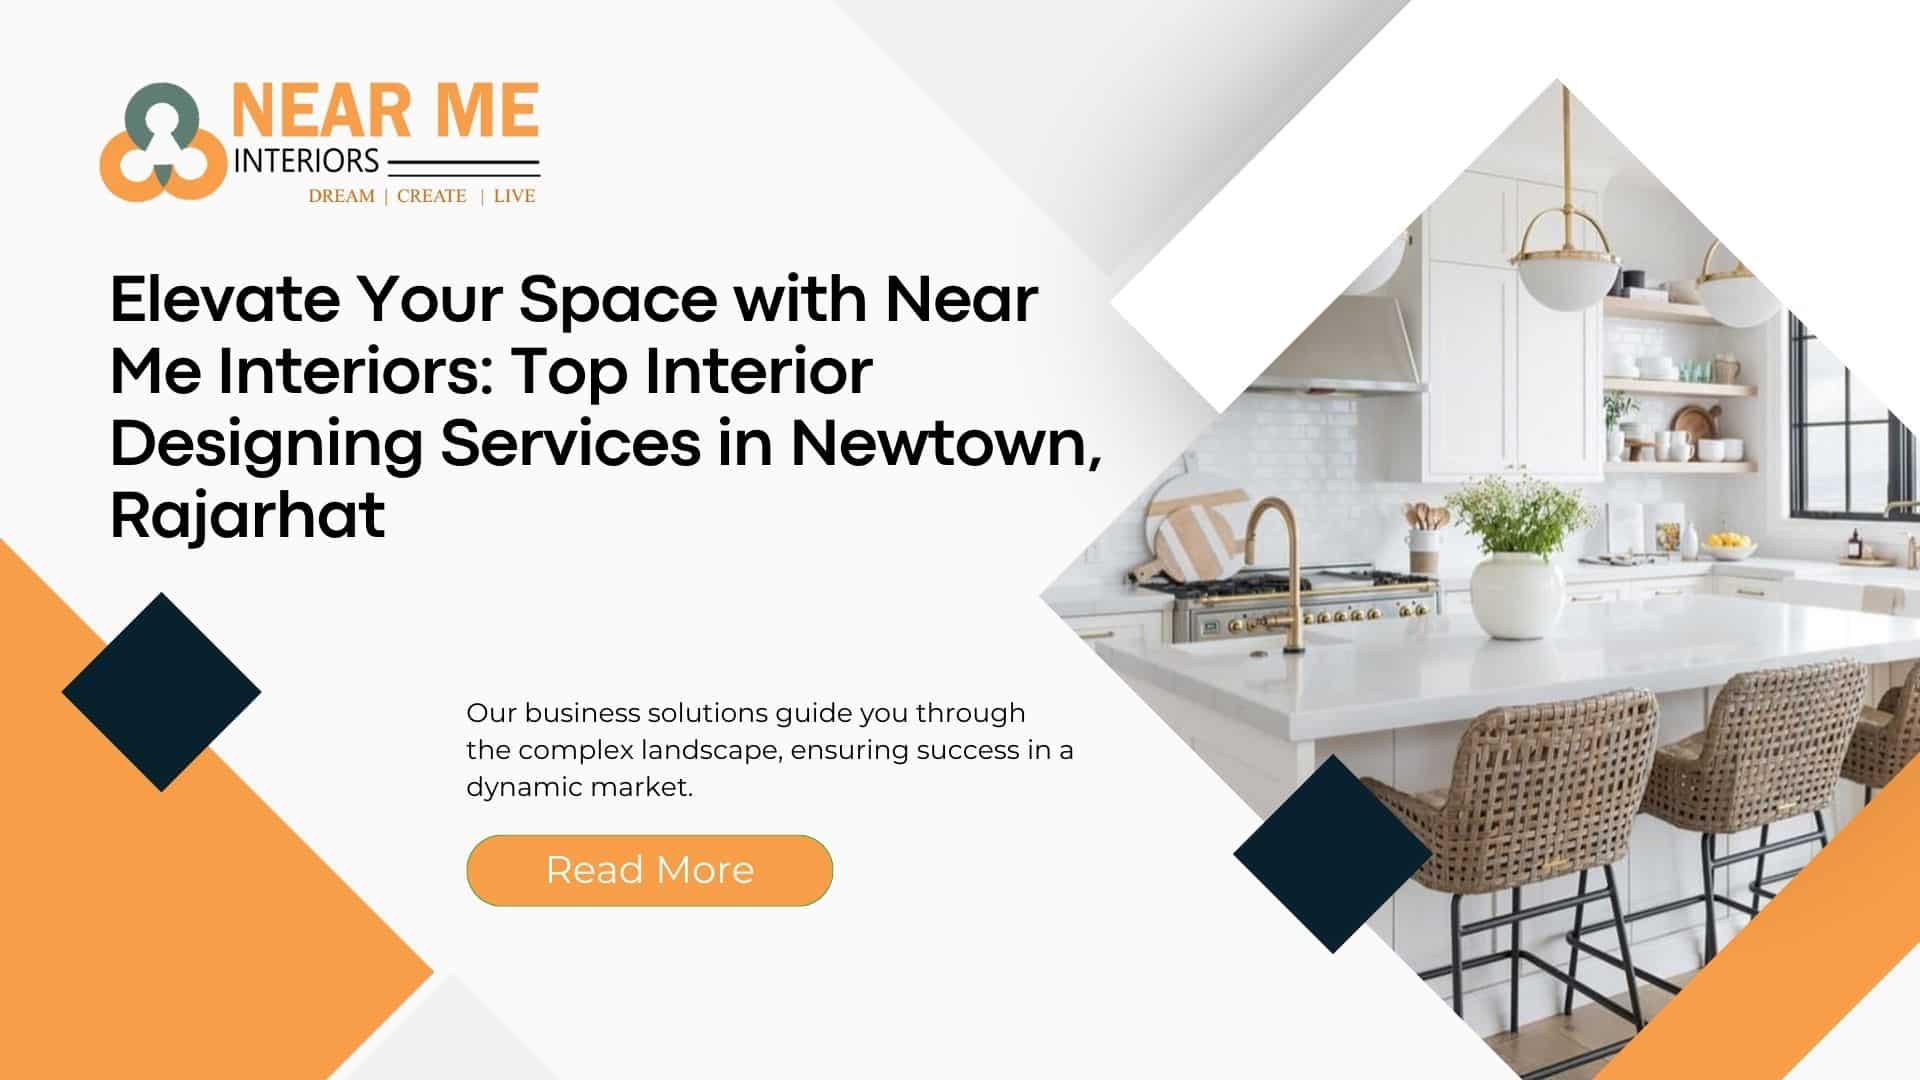 Elevate Your Space with Near Me Interiors: Top Interior Designing Services in Newtown, Rajarhat